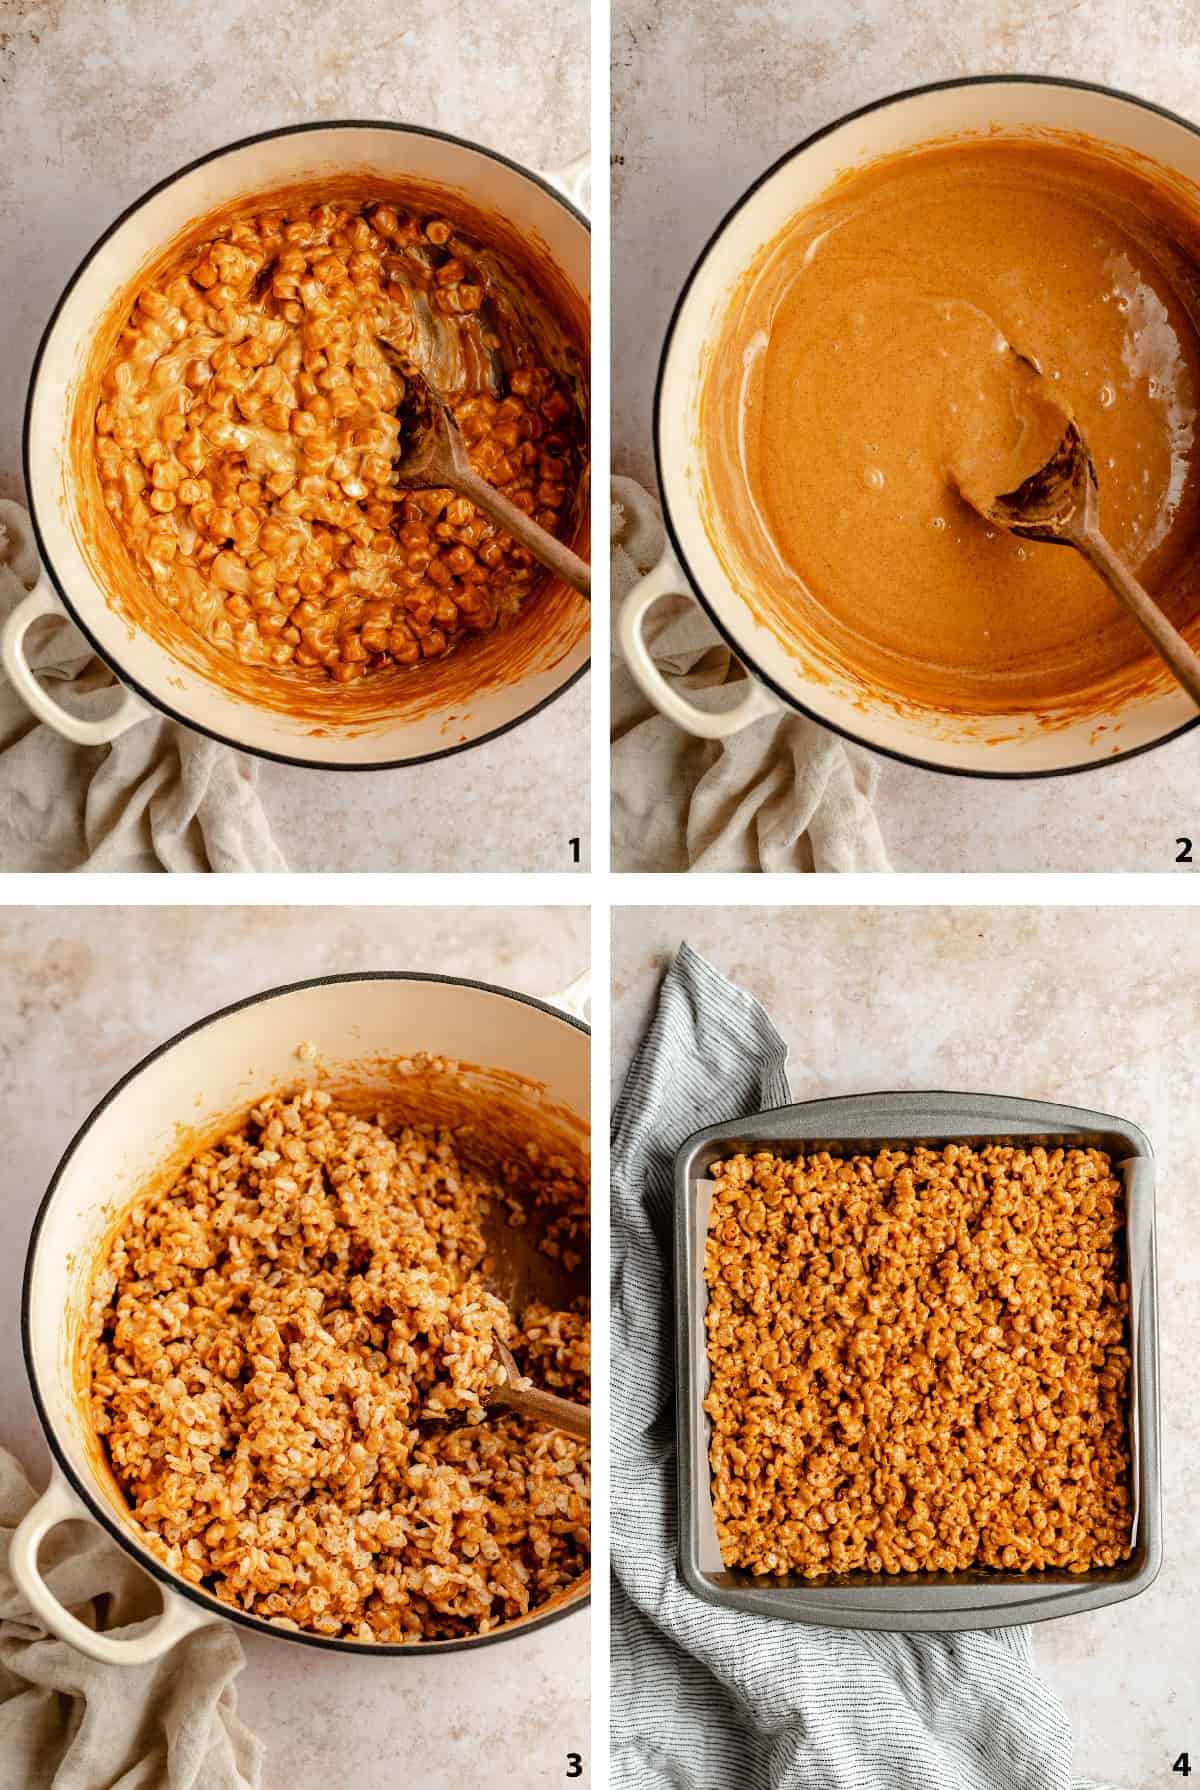 Steps of making the rice krispie treat mix and pressing into a baking tin.